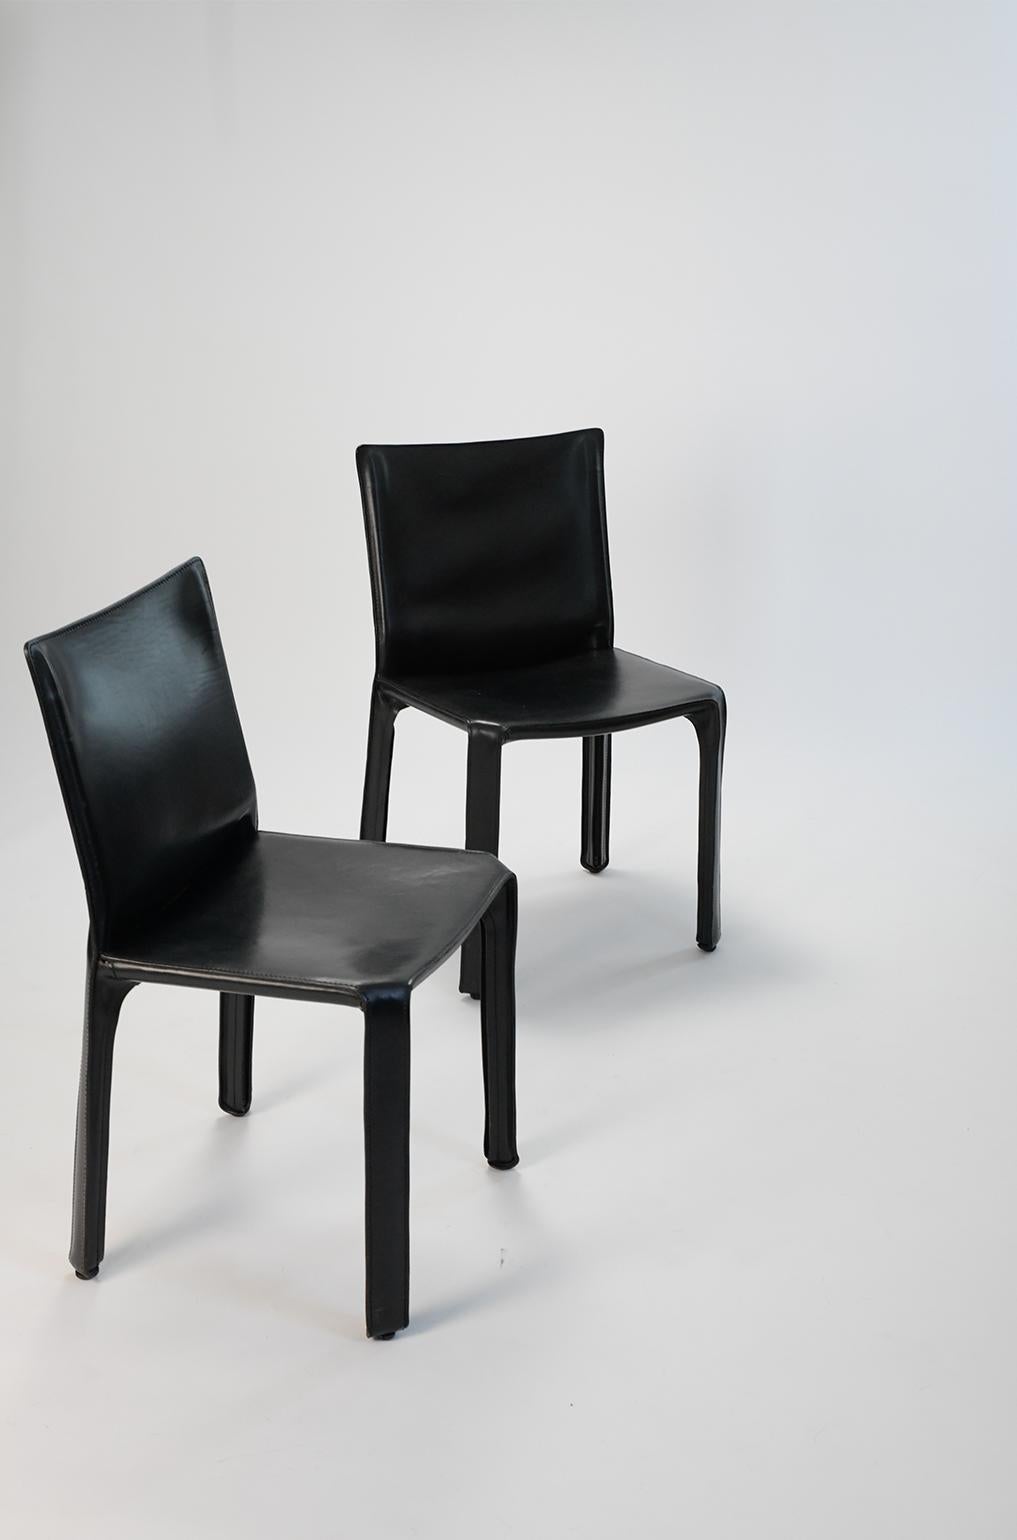 Mario Bellini Cab Chairs by Cassina - Set of Four  In Good Condition For Sale In Los Angeles, CA